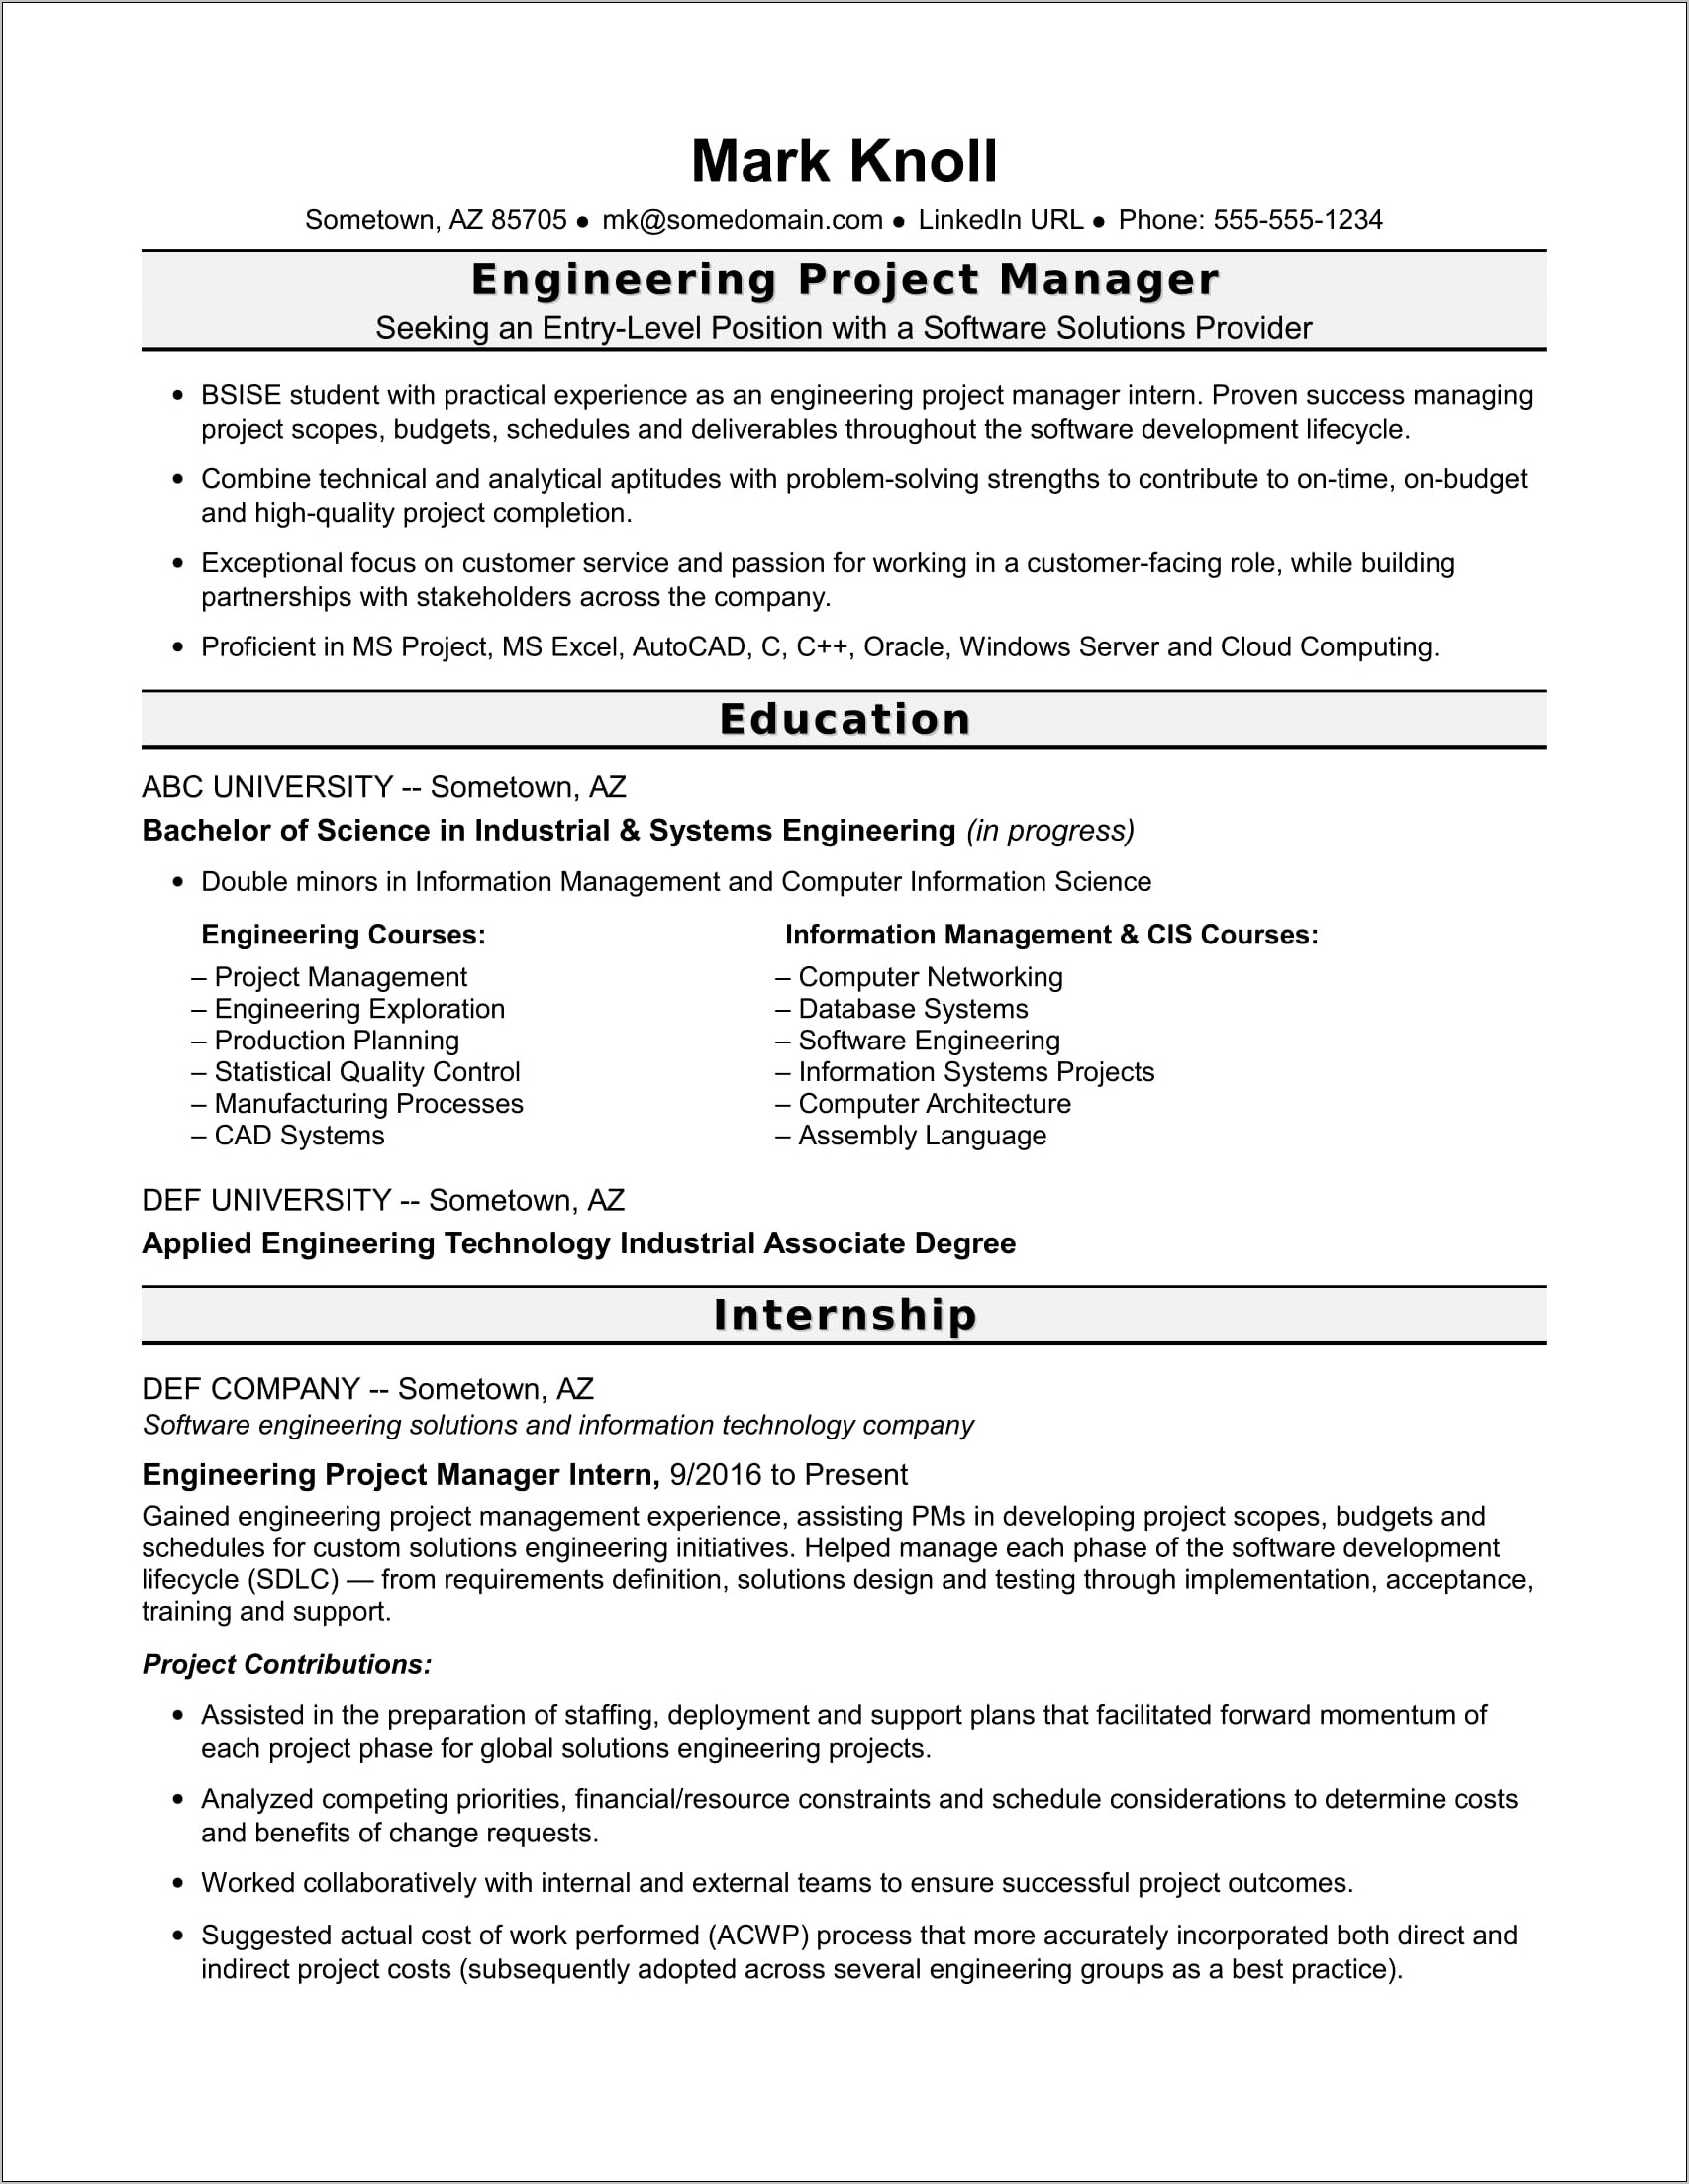 Information Technology Manager Resume New